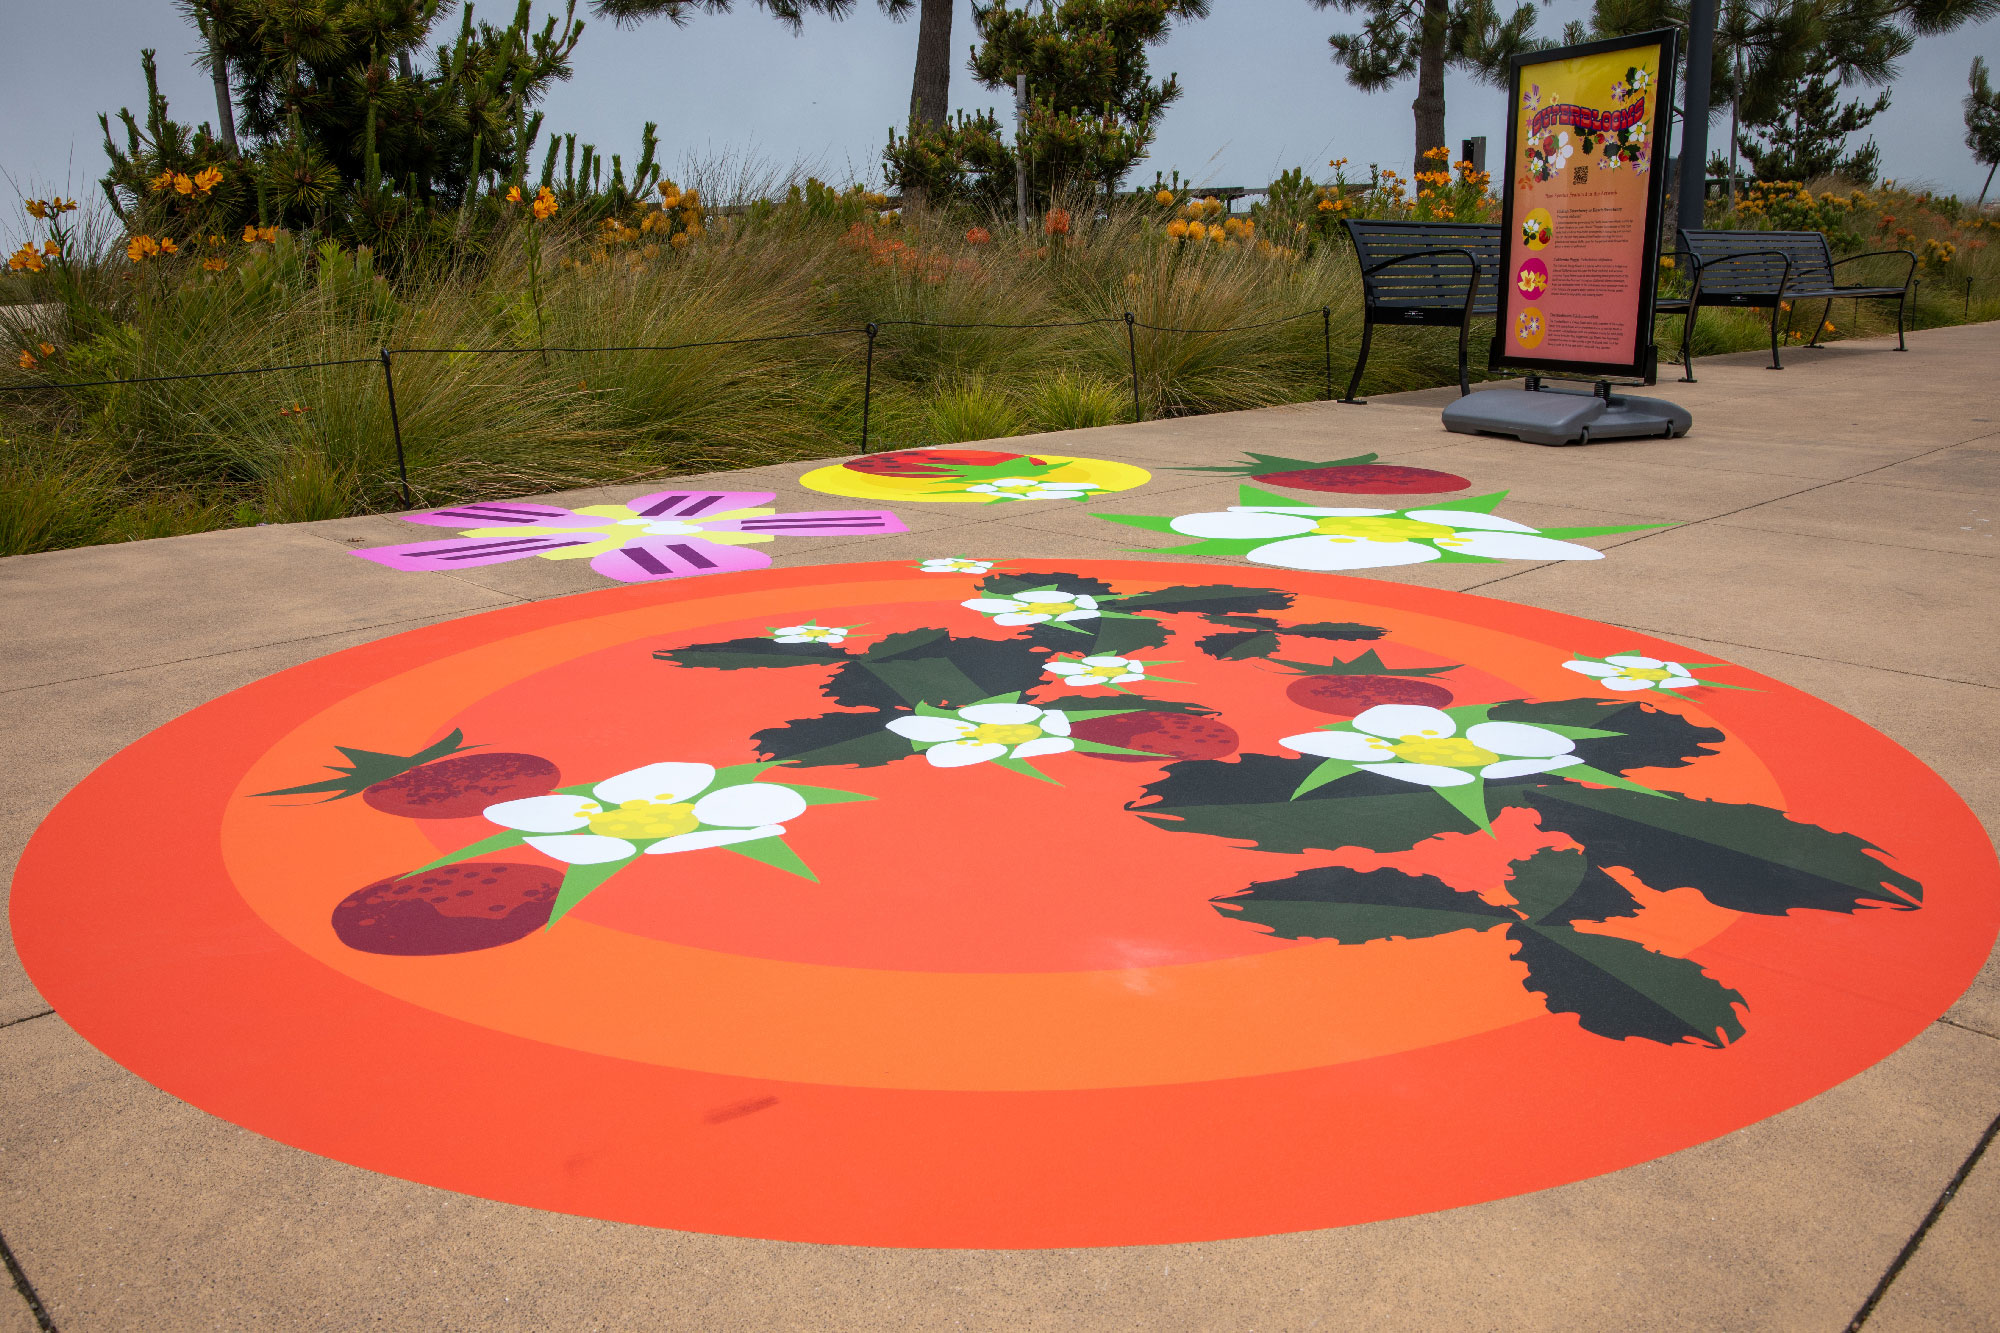 view of sidewalk with large orange decal and depictions of strawberry plant